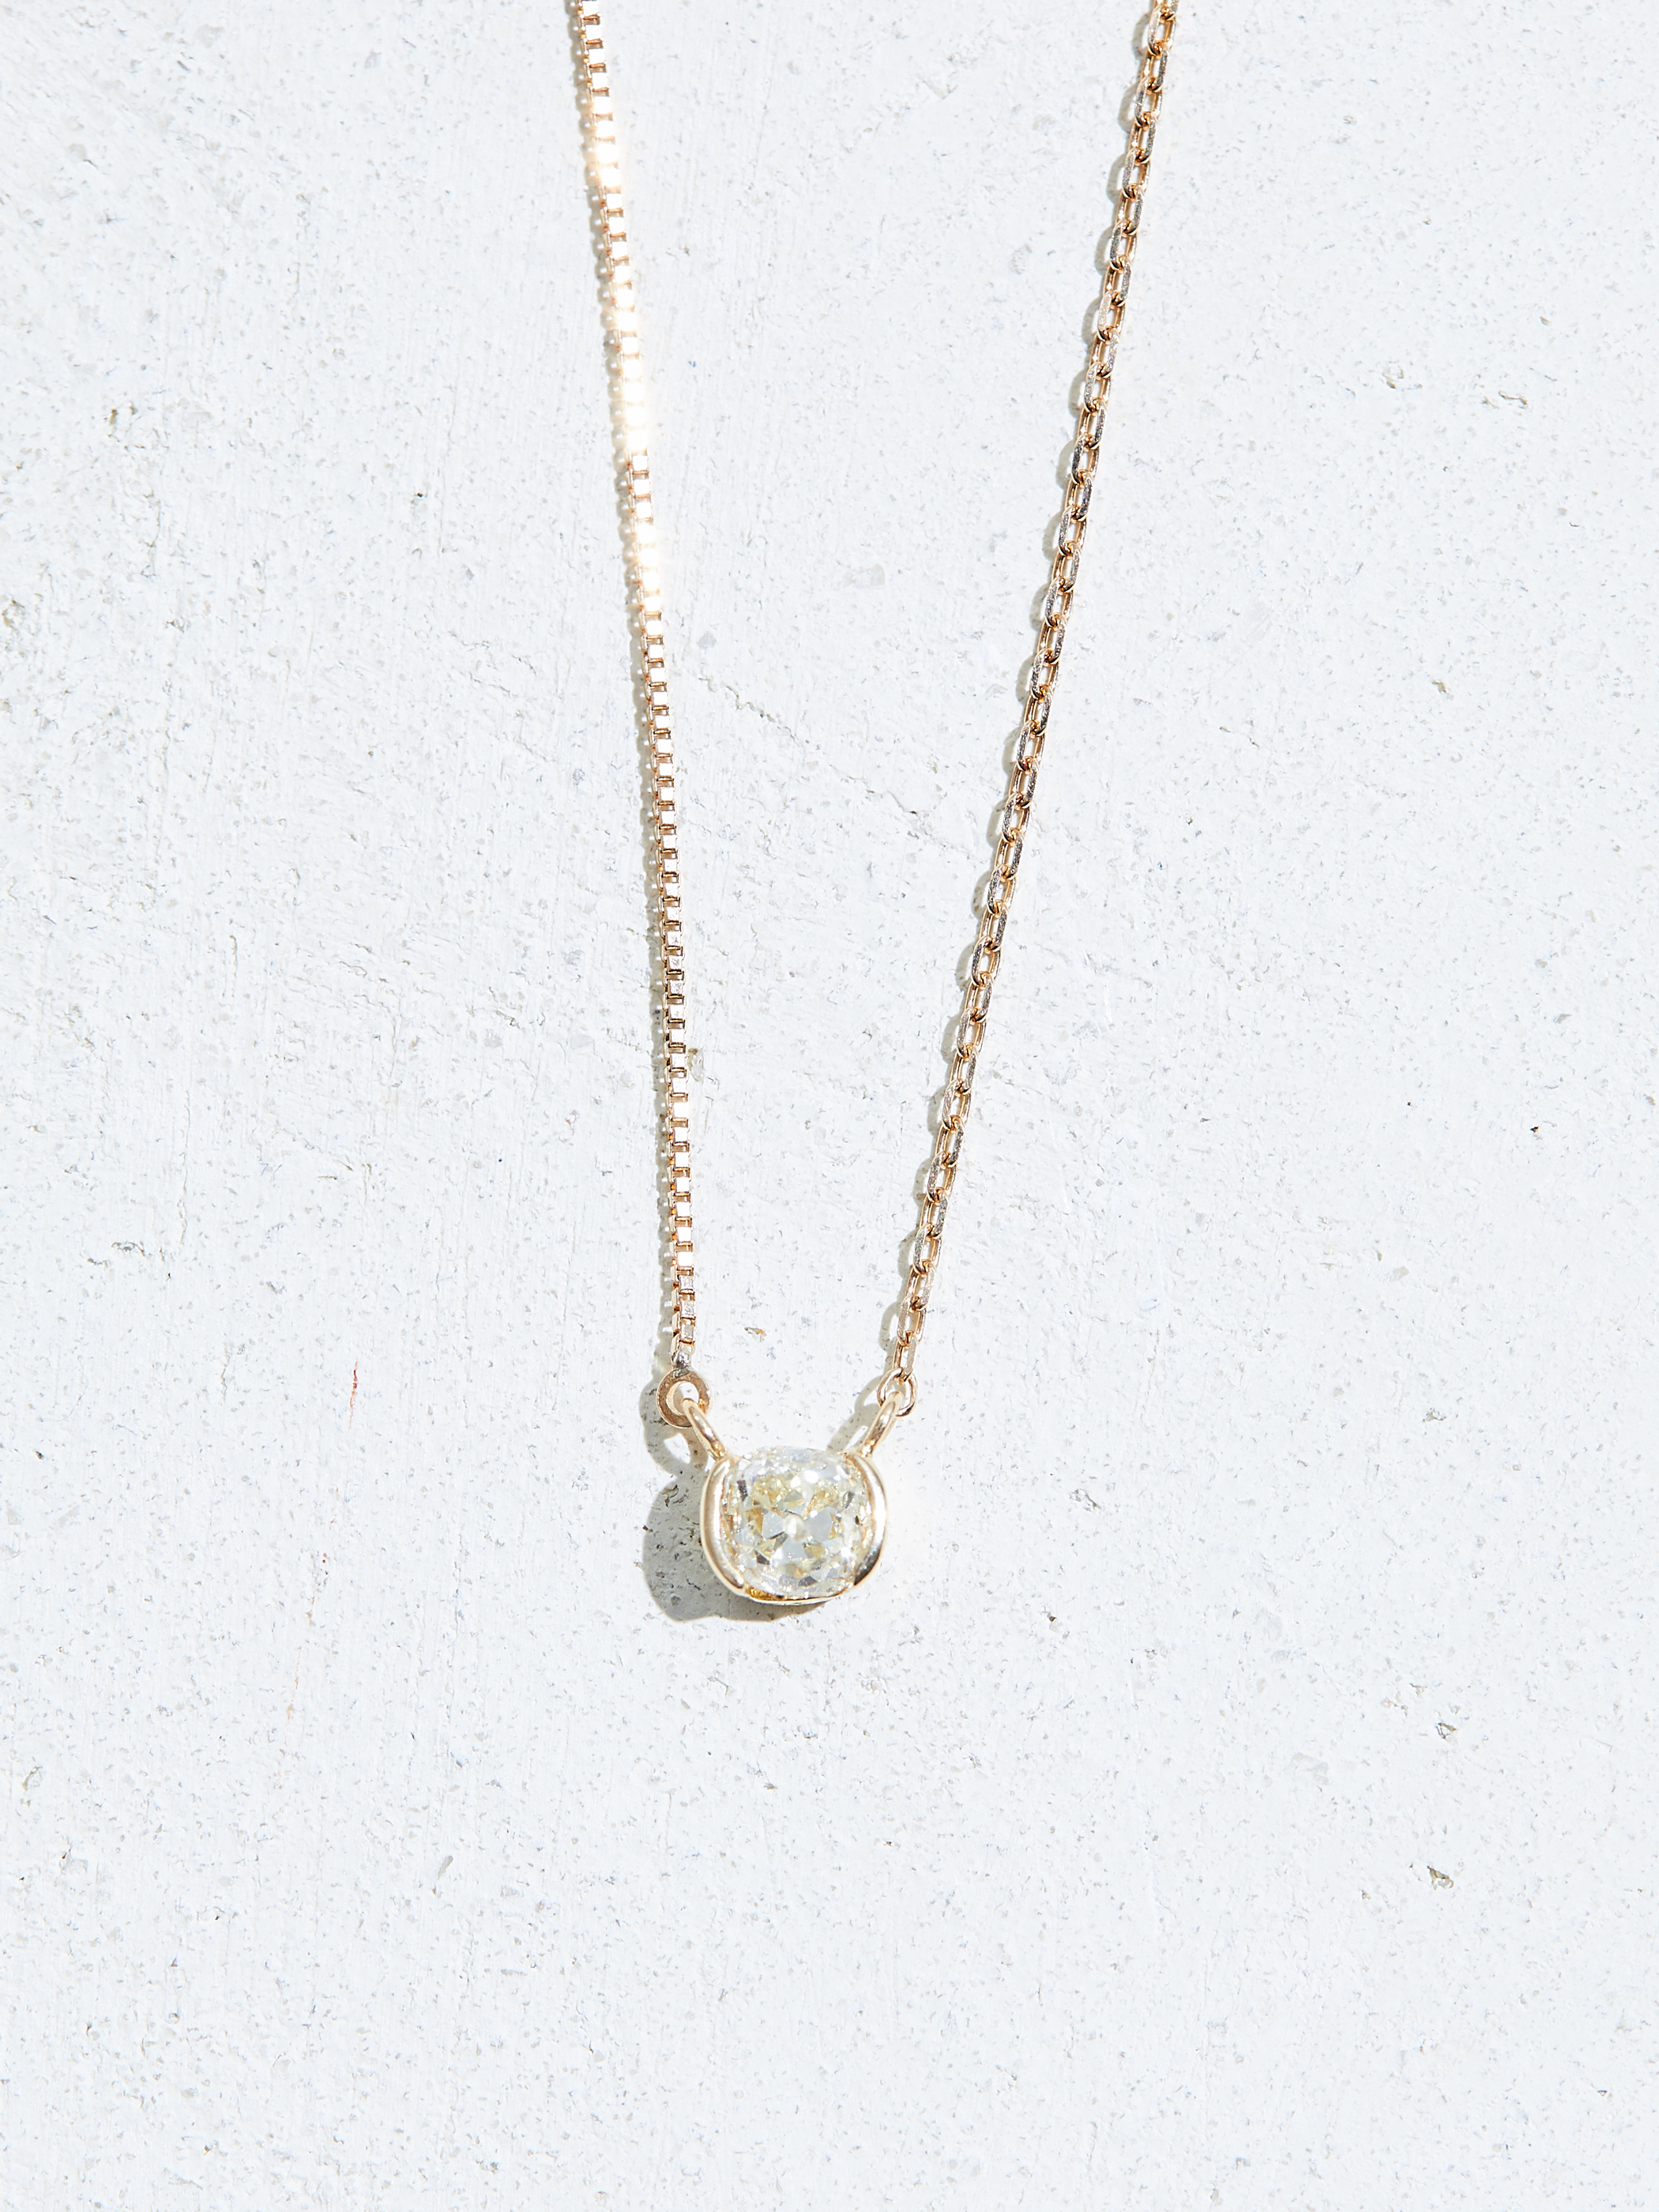 RECYCLING ANTIQUE DIAMOND NECKLACE